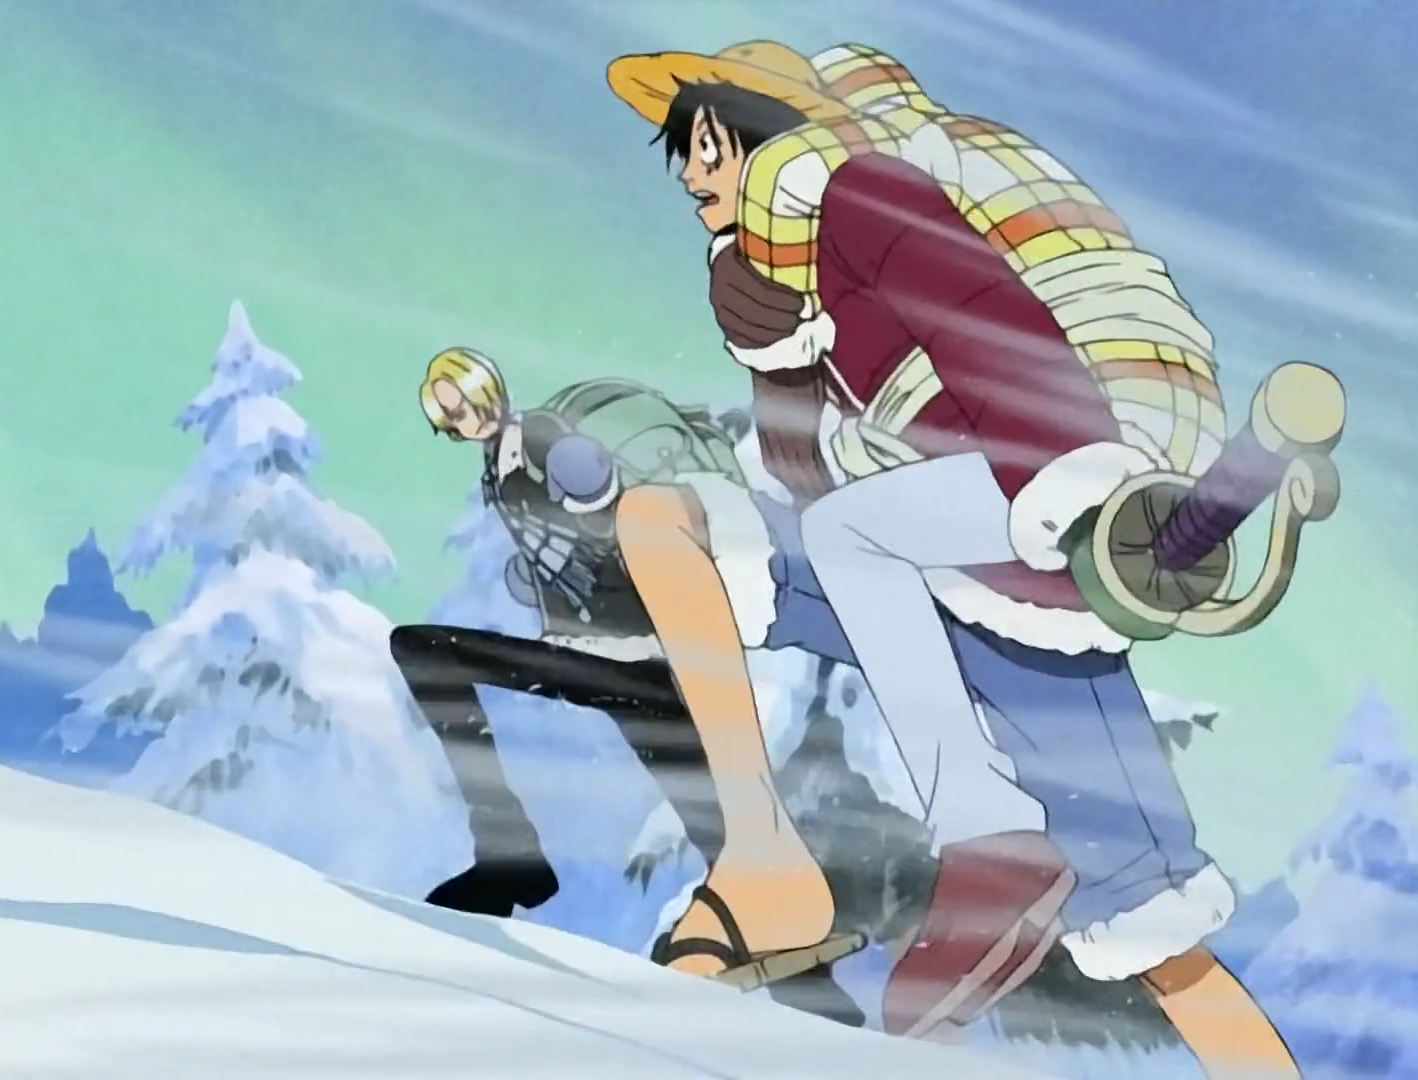 One Piece Luffy and Sanji climb the snowy mountain carrying sick Nami